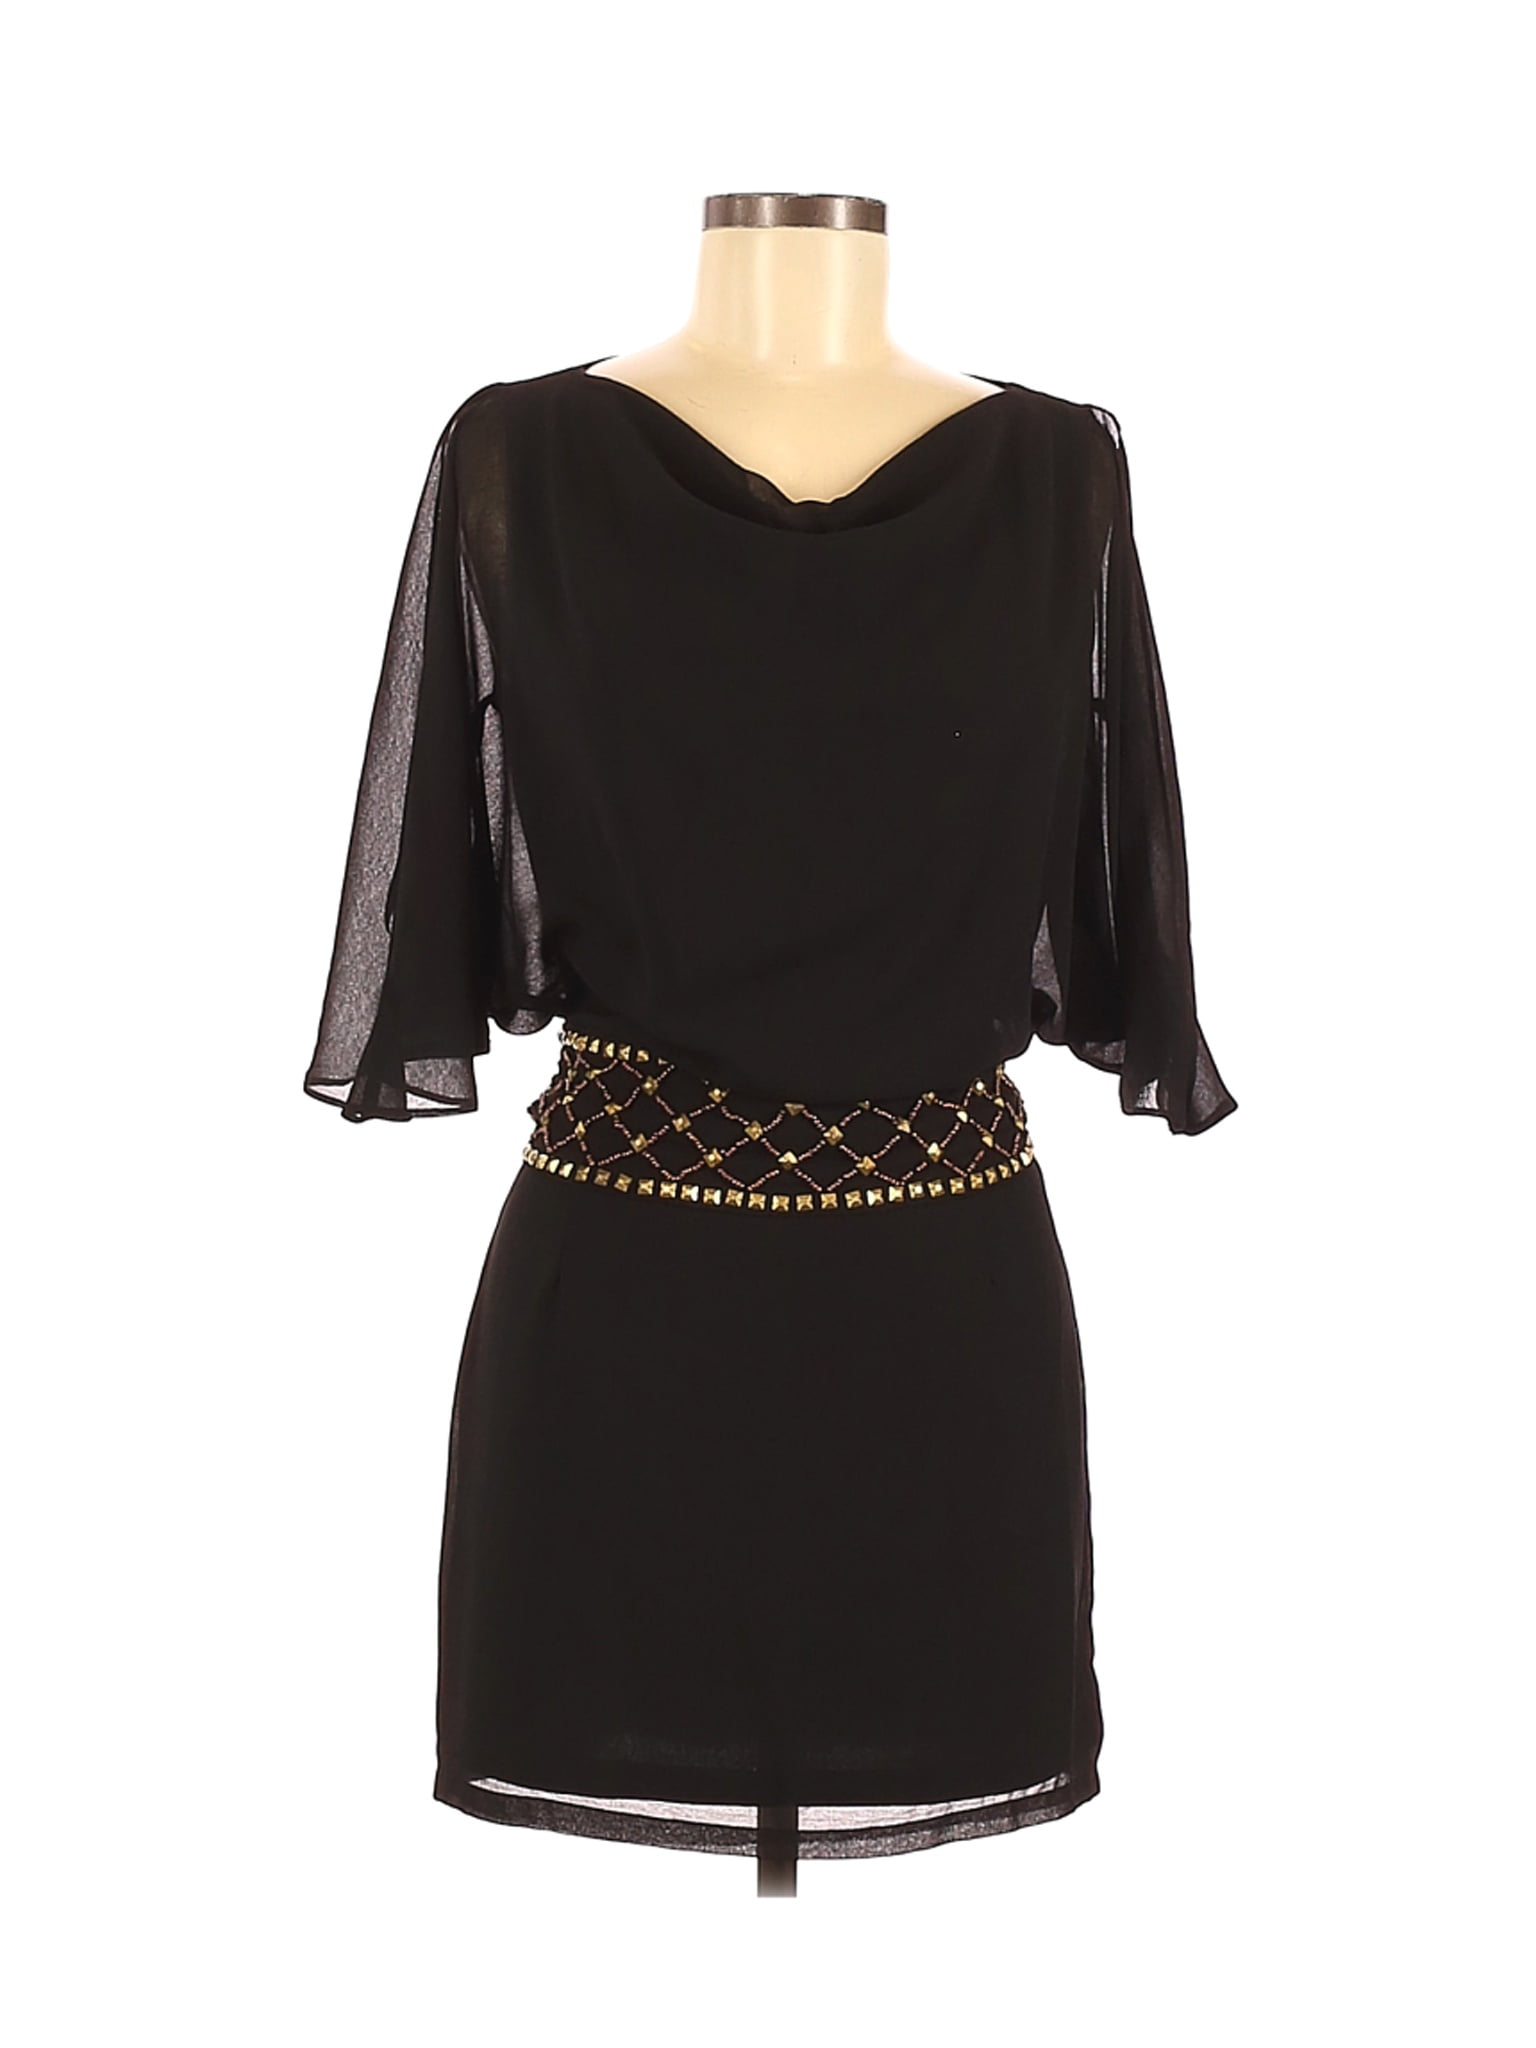 m and co black dress